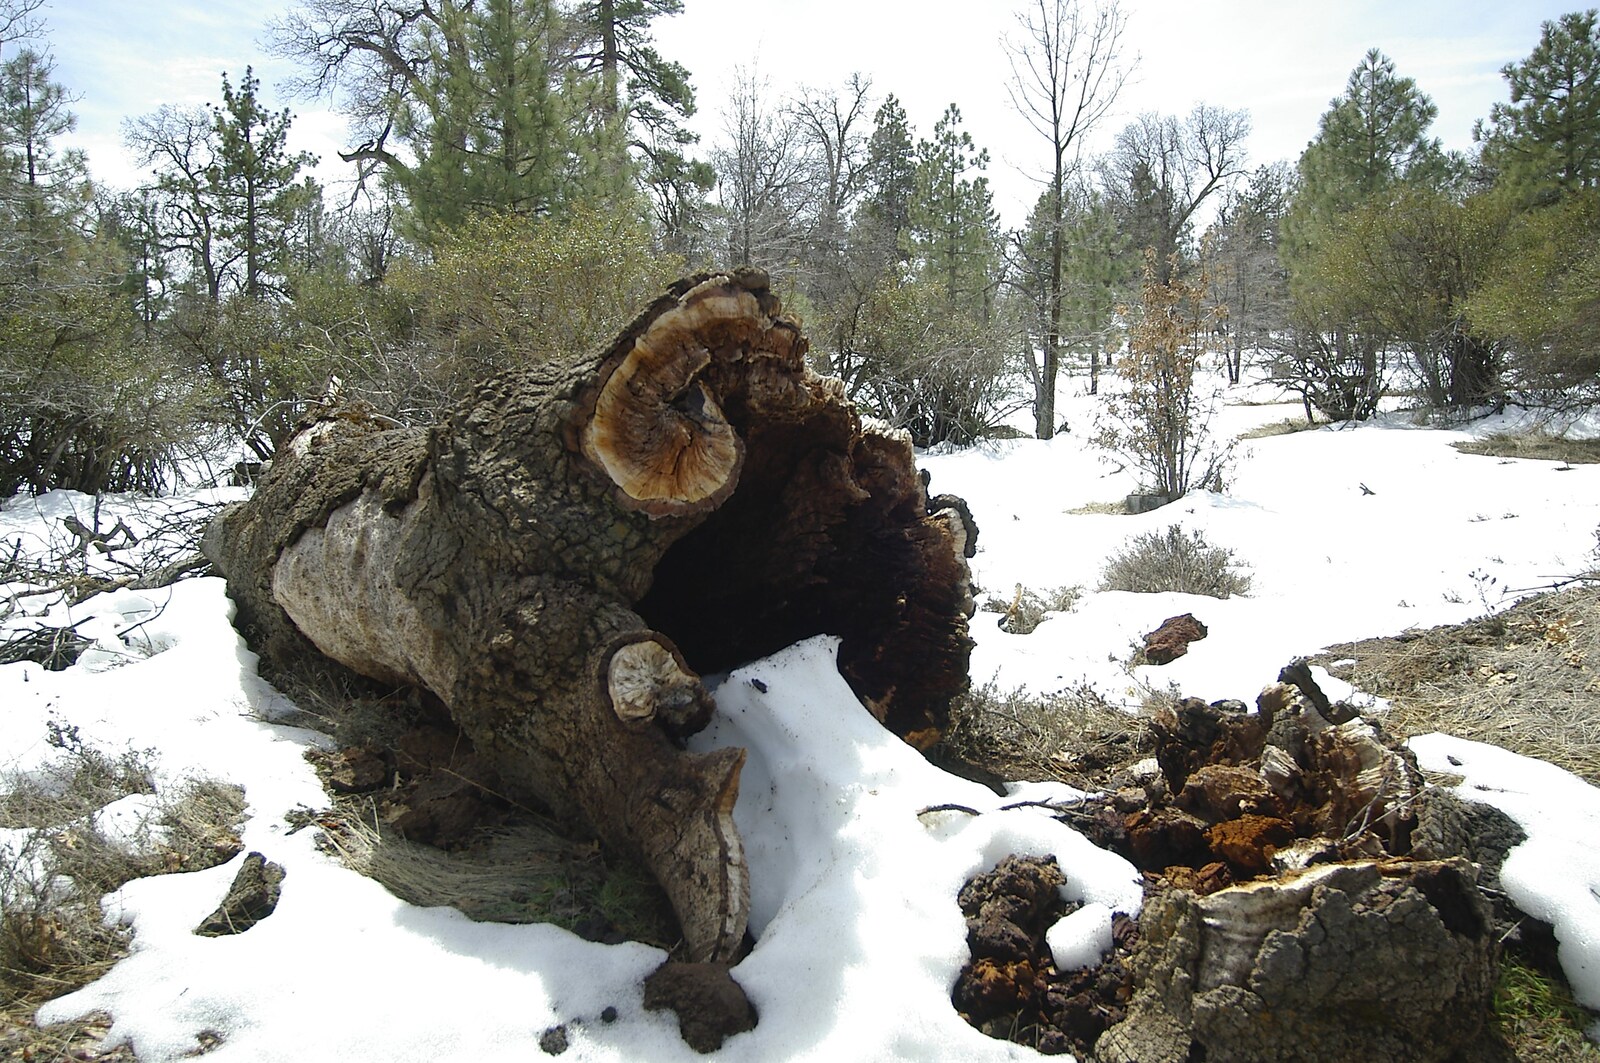 A tree stump in the snow from California Snow: San Bernadino State Forest, California, US - 26th March 2006